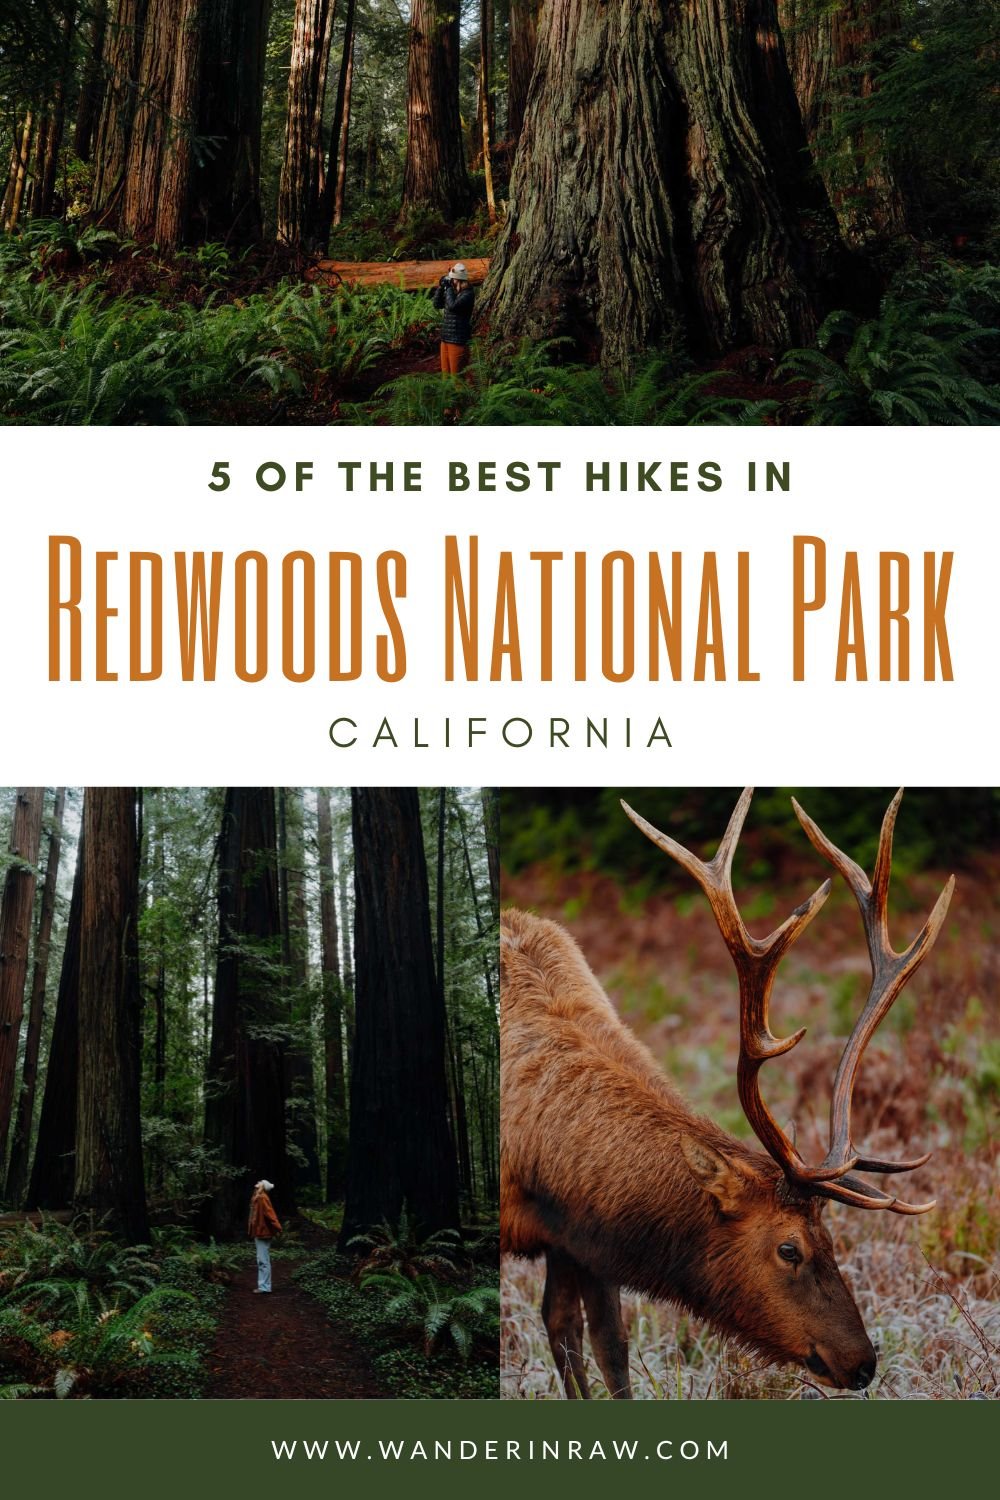 5 of the Best Hikes in the Redwoods